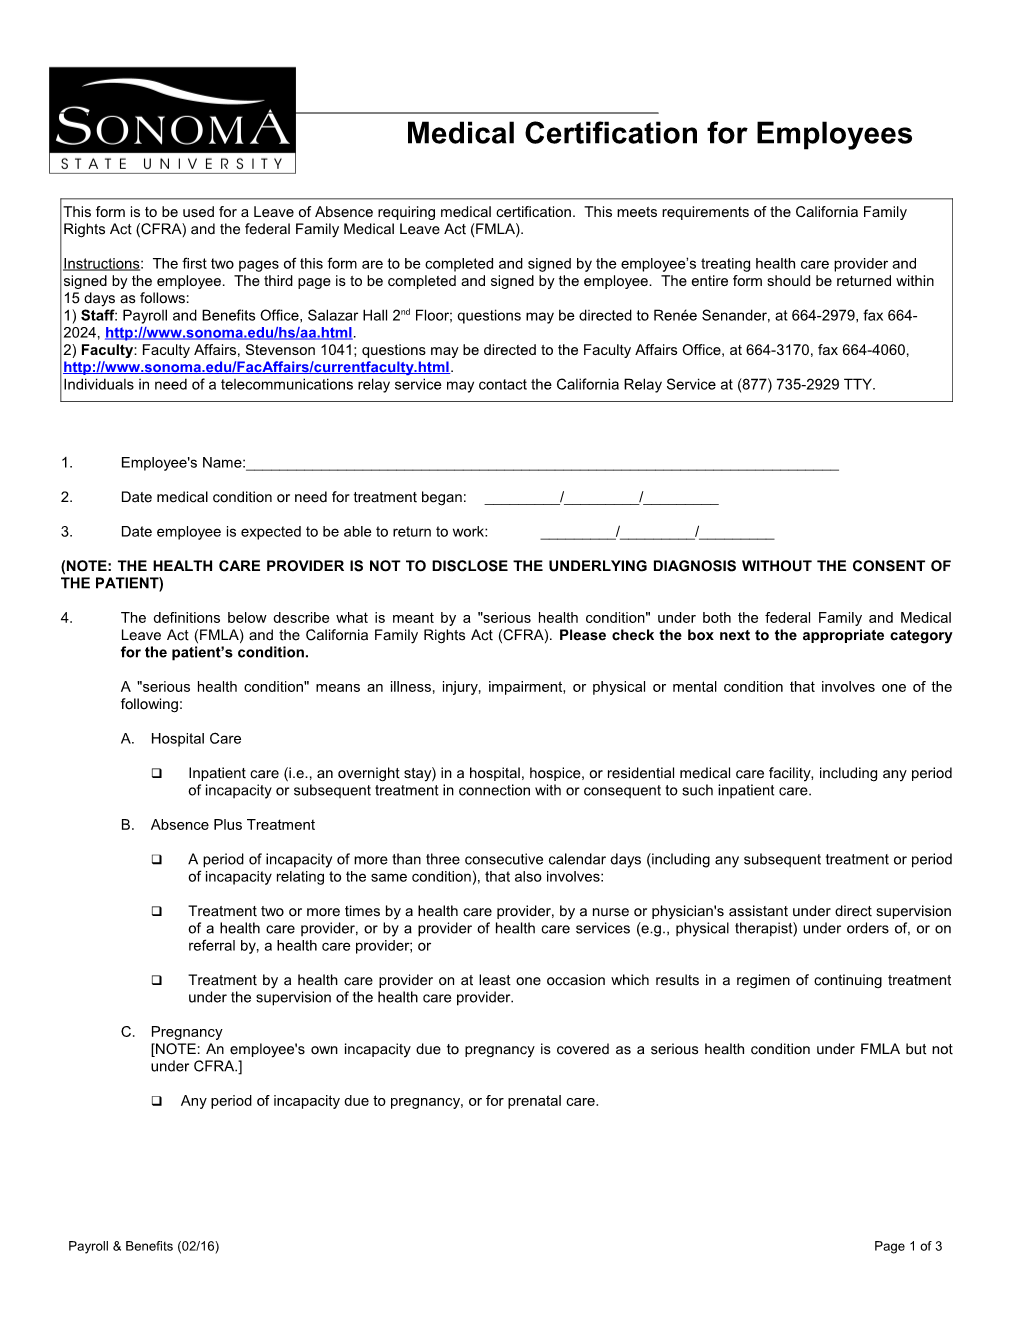 This Form Is to Be Used for a Leave of Absence Requiring Medical Certification. This Meets